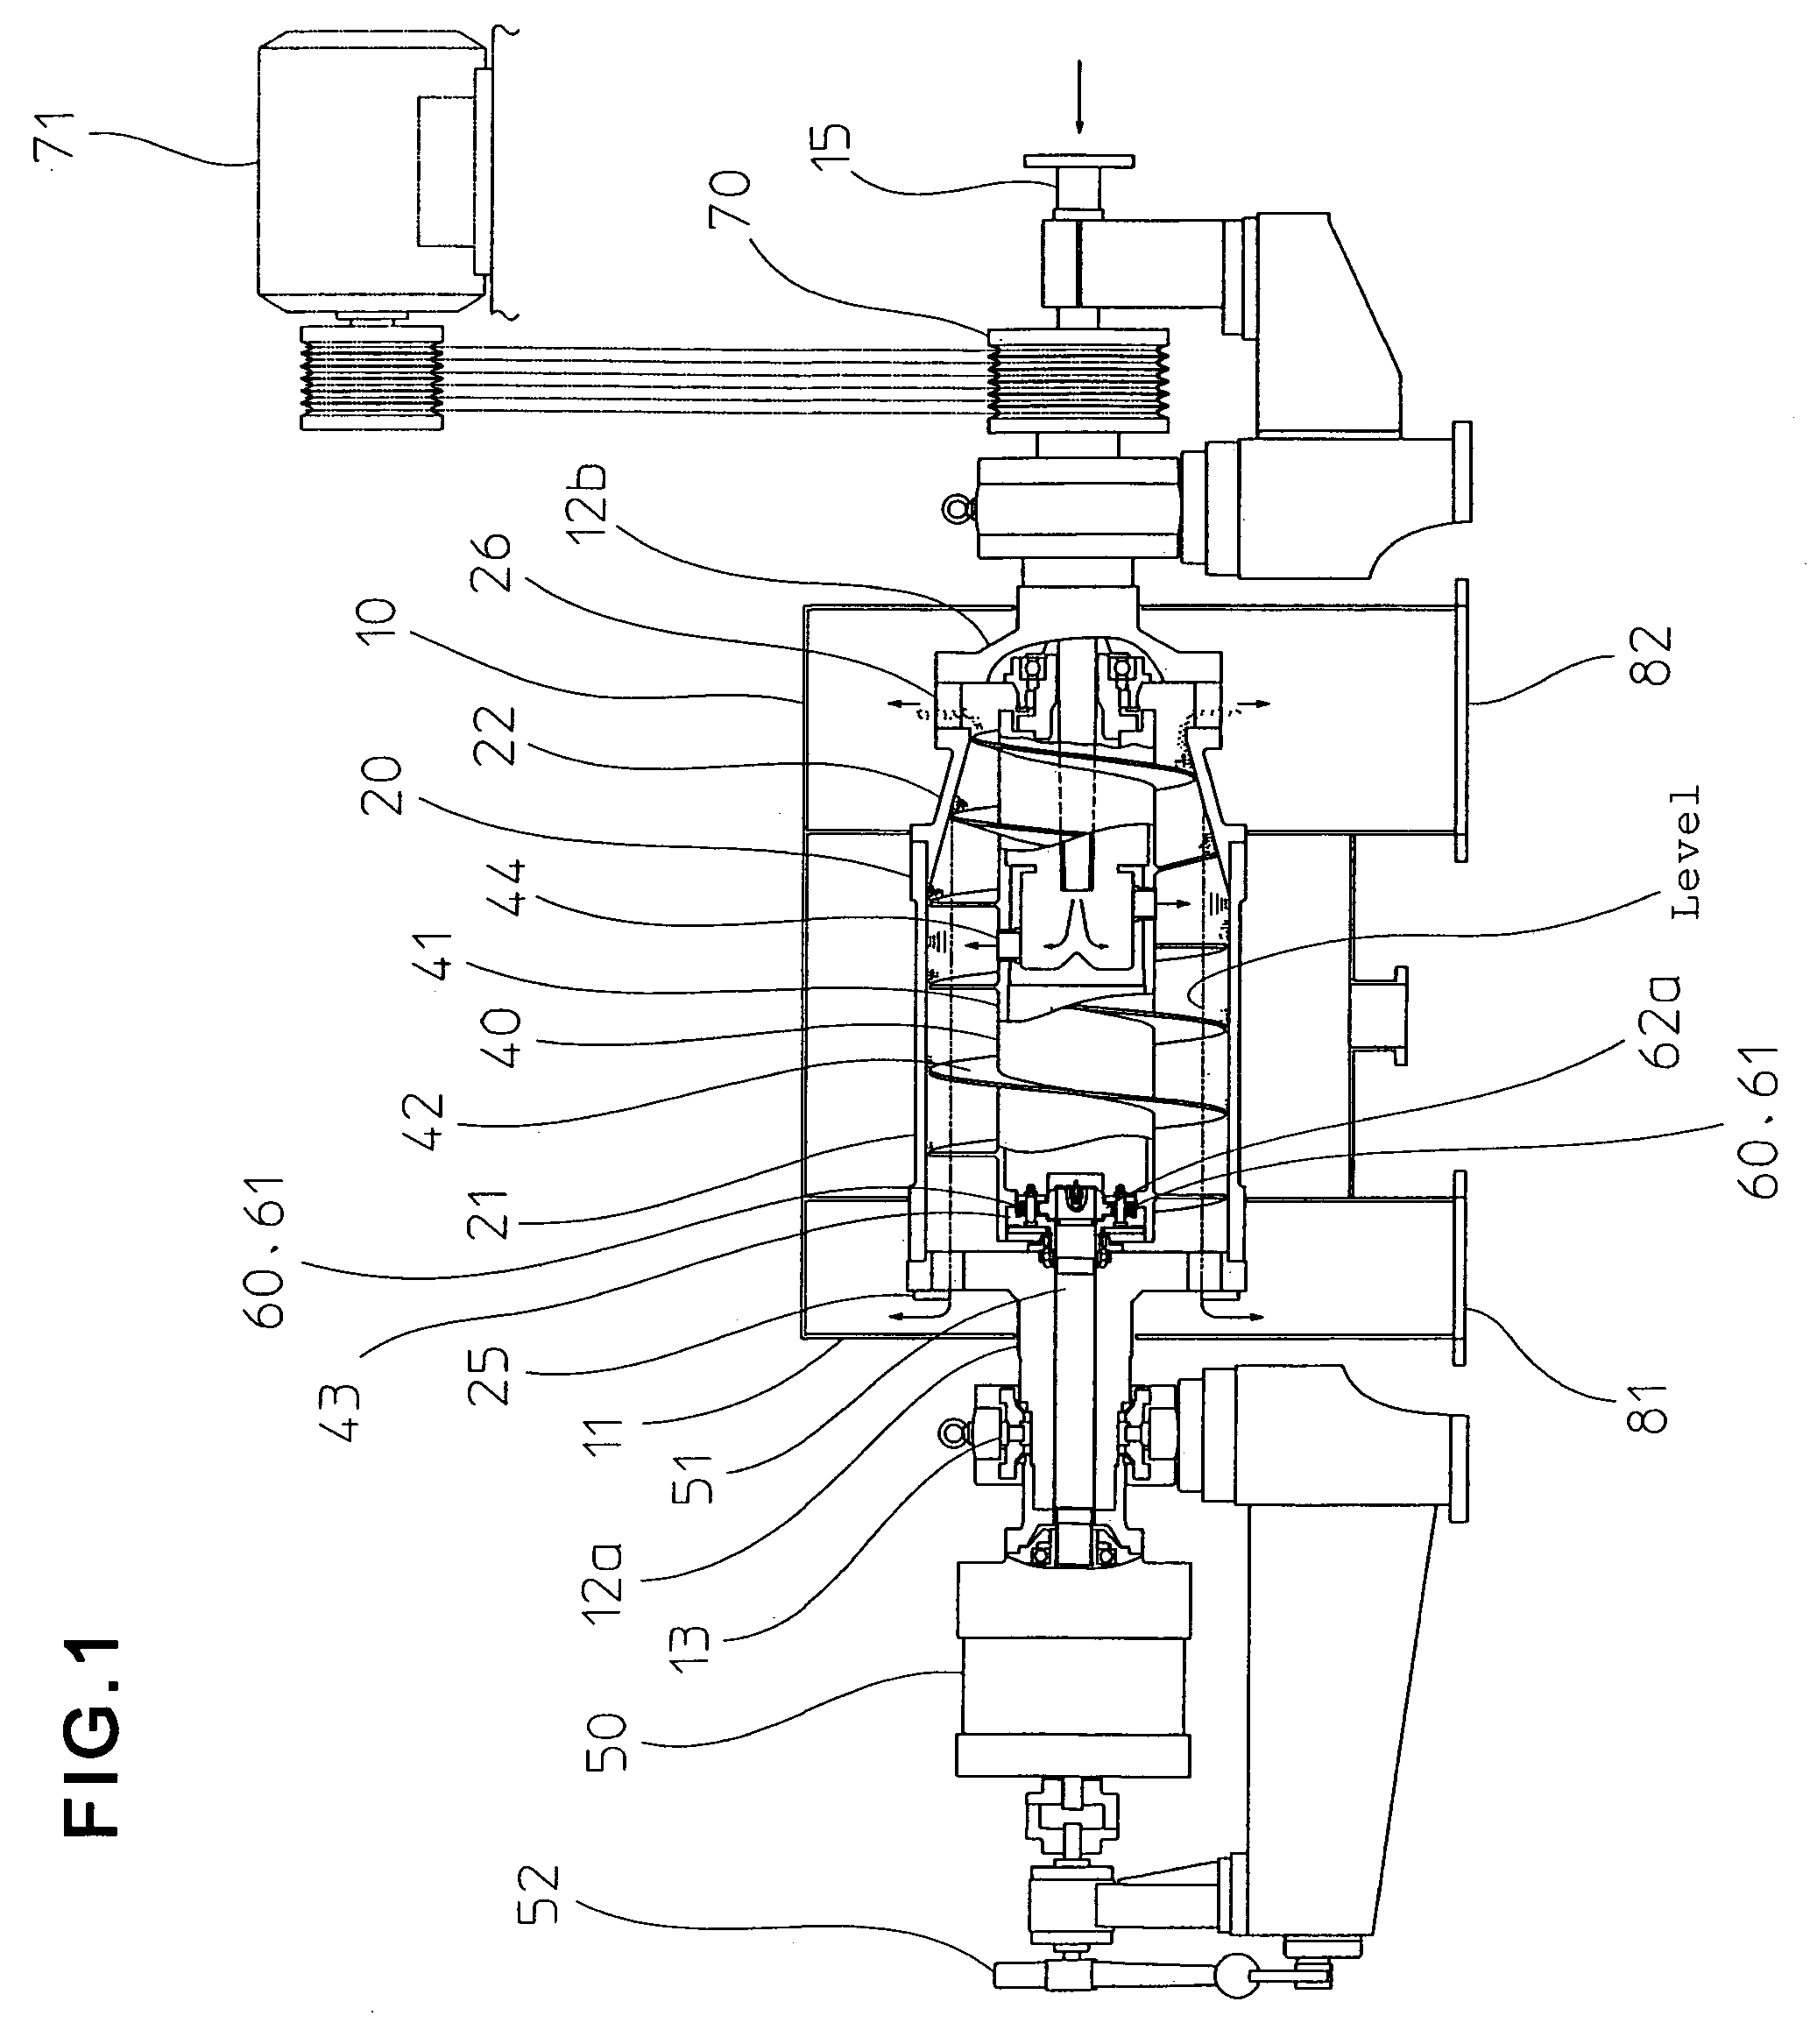 Decanter type centrifugal separator with torque transmission mechanism